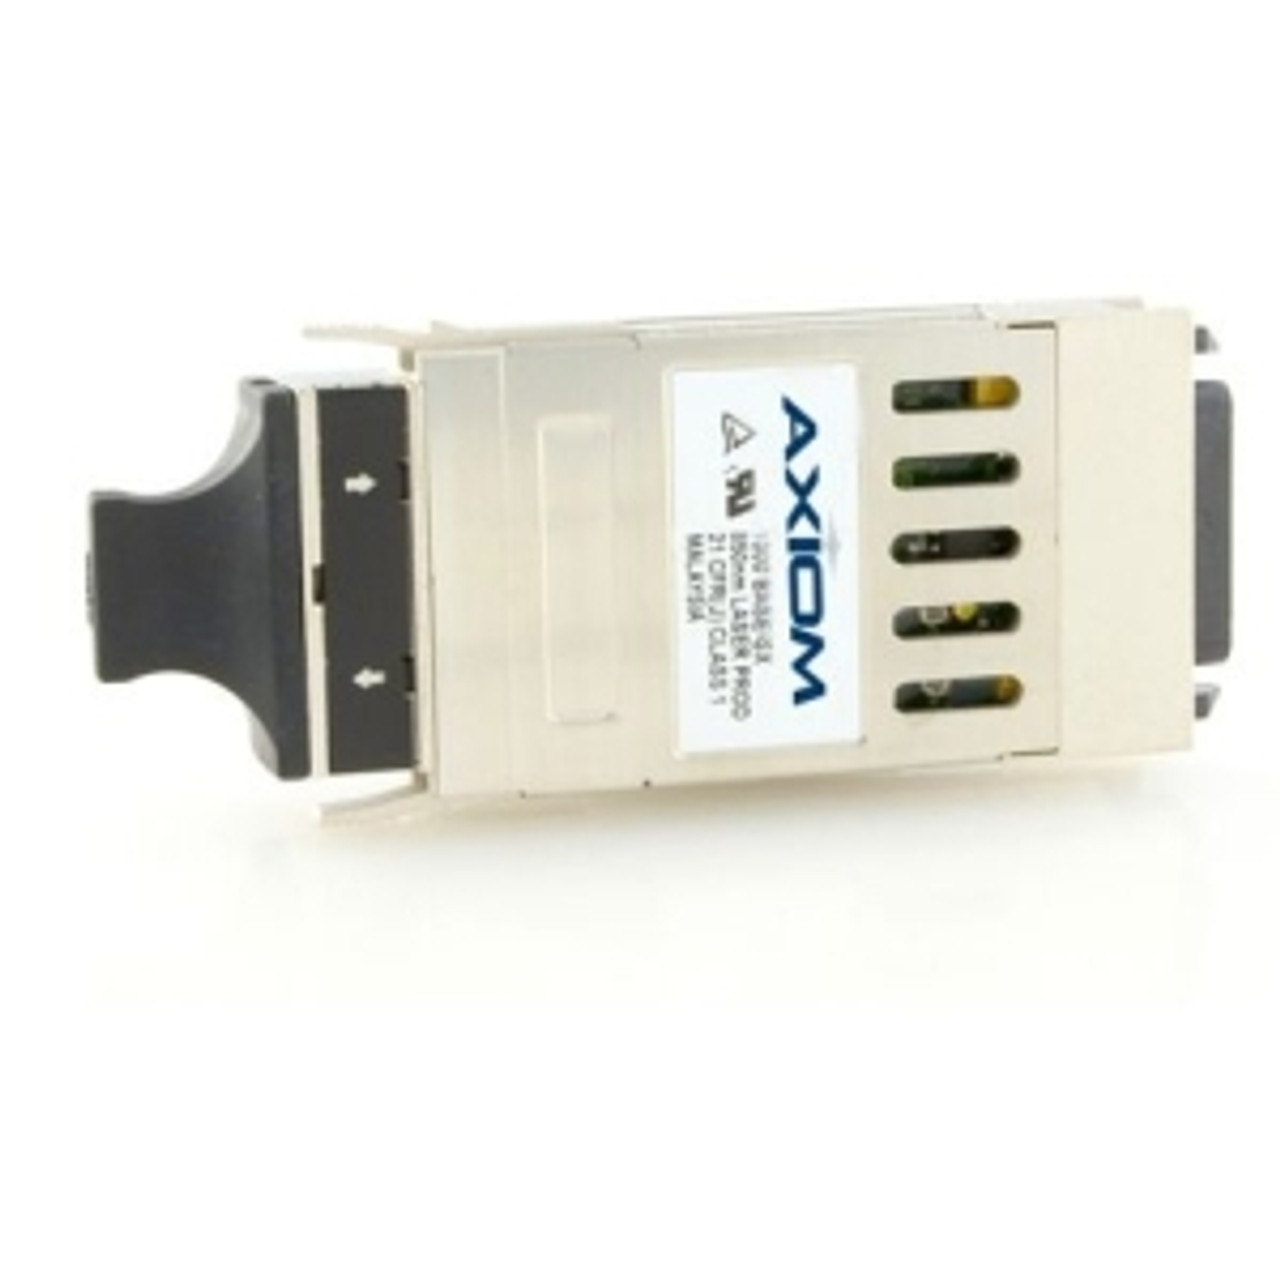 AT-G8T-AX Axiom 1.25Gbps 1000Base-T Copper 100m RJ-45 Connector GBIC Transceiver Module for Allied Telesis Compatible